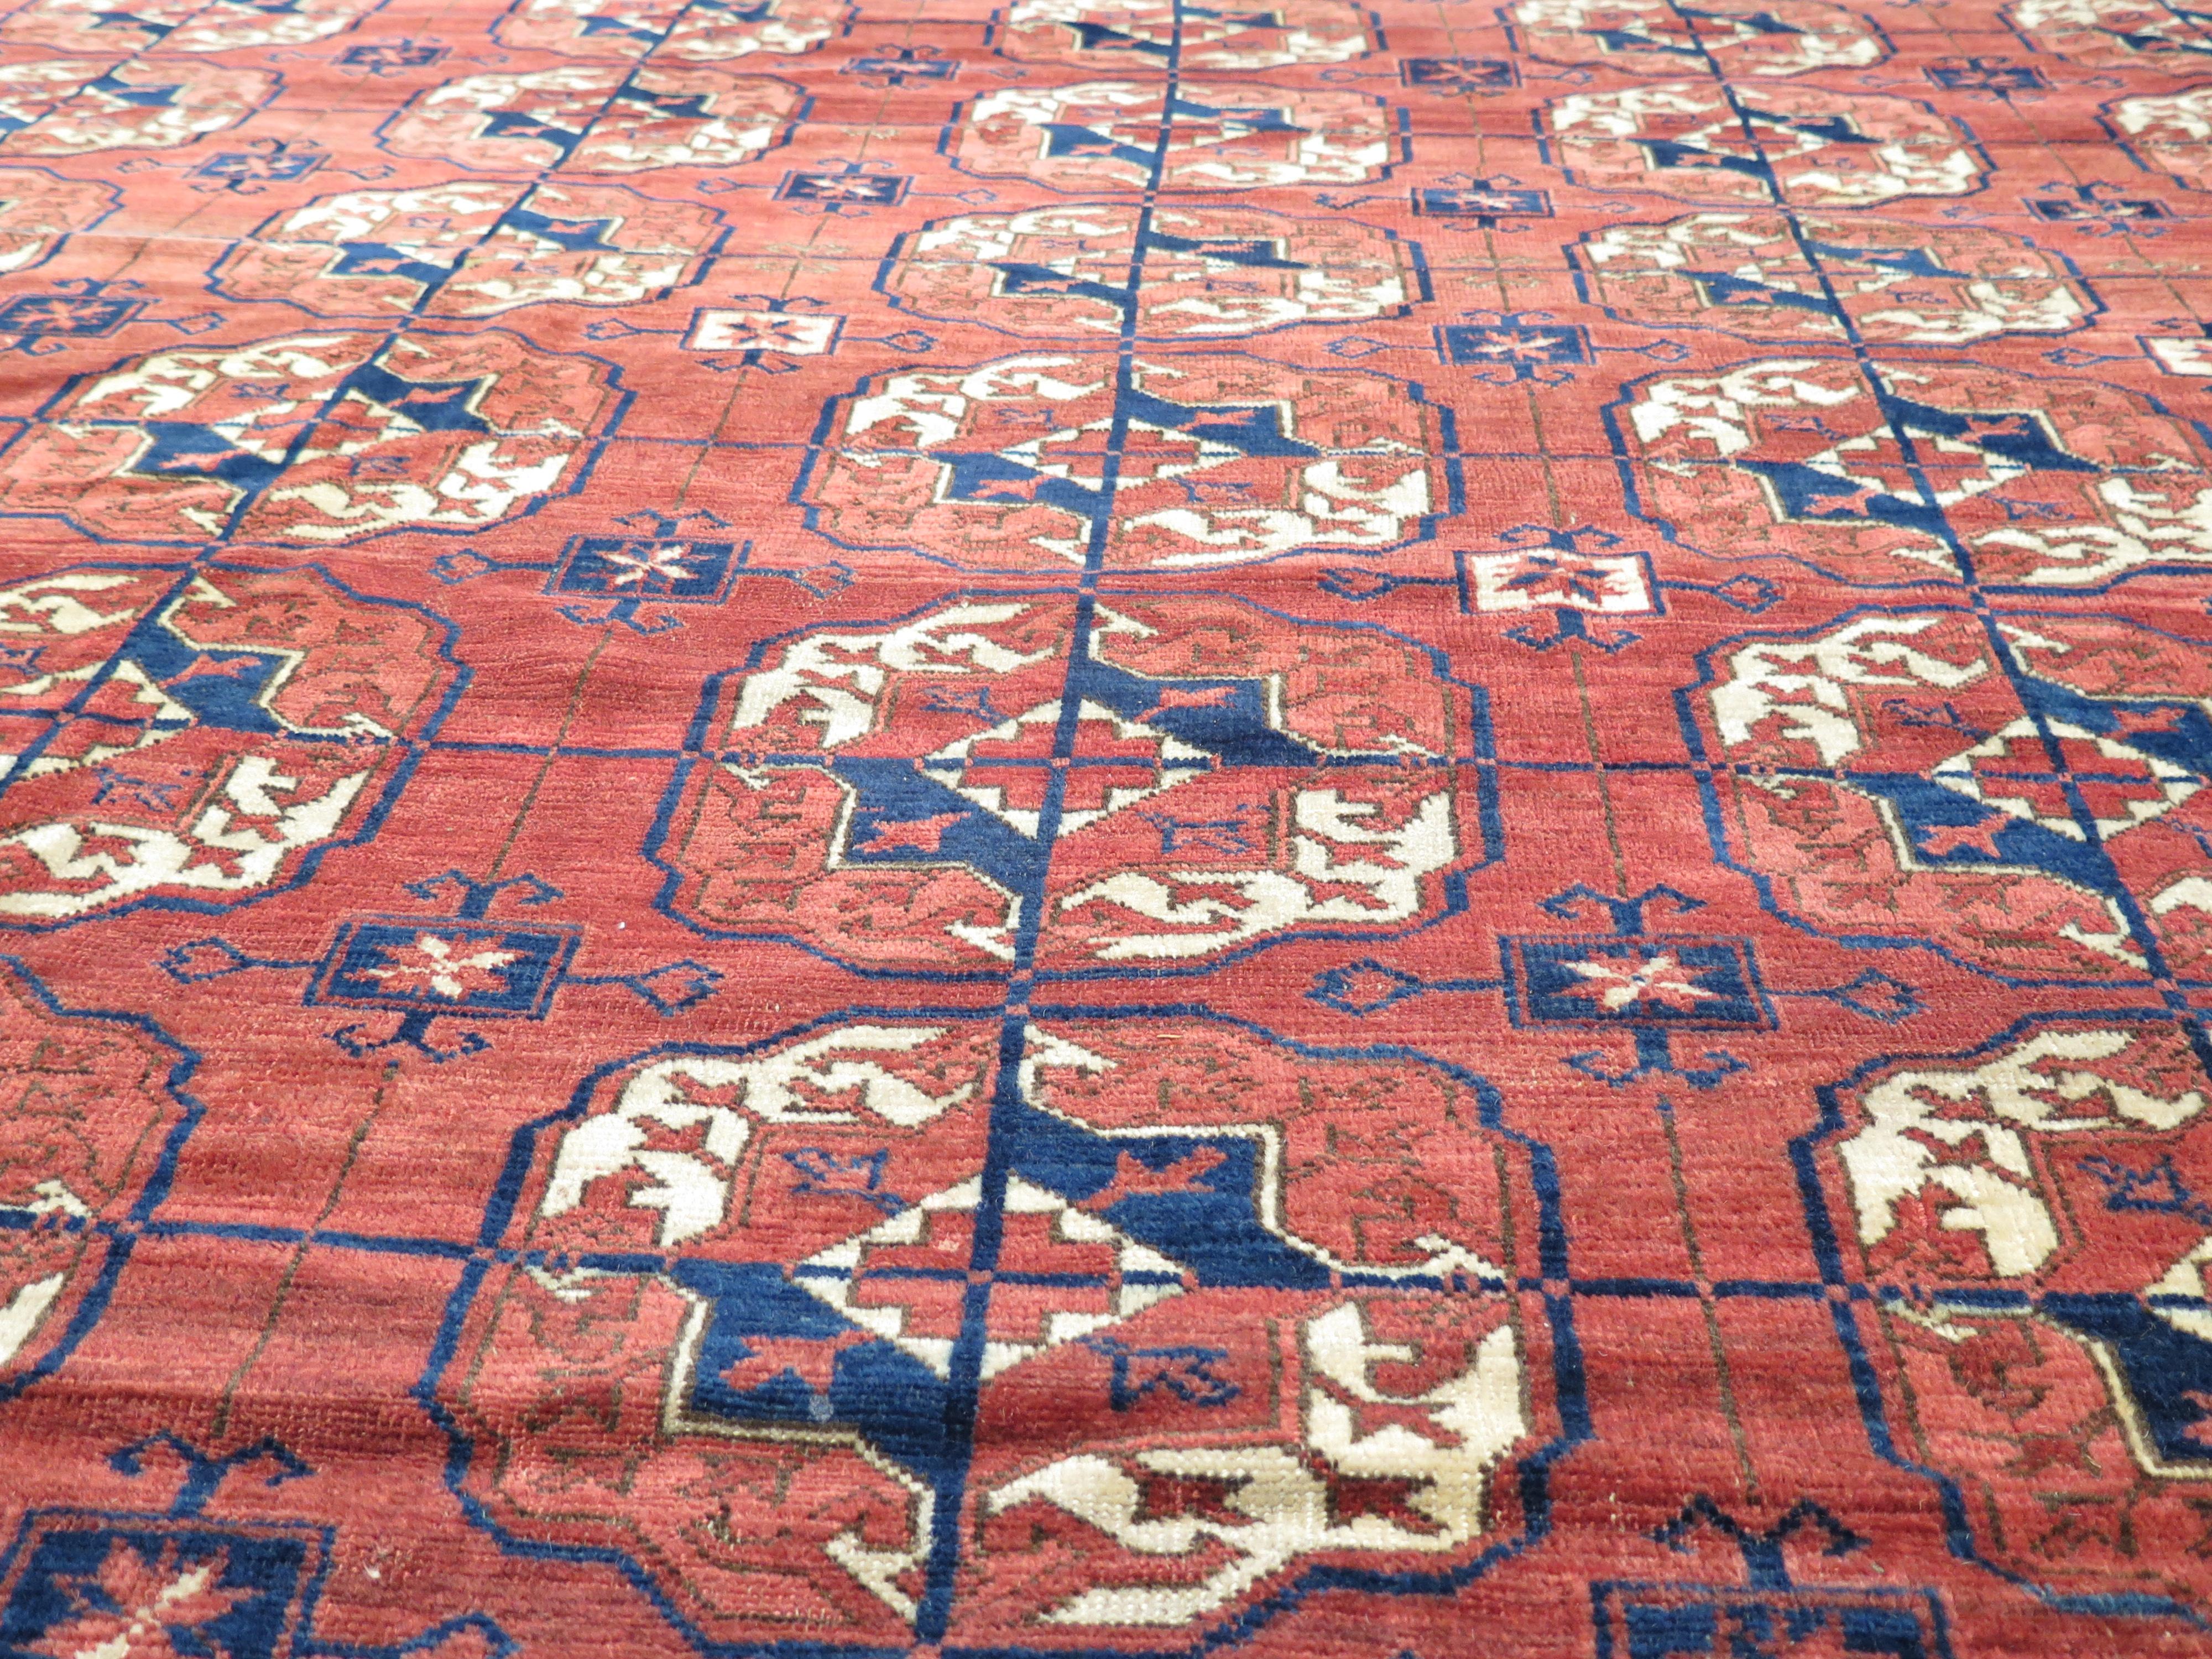 Tekke carpets are instantly recognizable for their distinctive stamped elephant foot patterns, even more so the early pieces, well known for their bold, visually arresting drawings. Produced by the weavers of the Tekke tribes of Central Asia, Tekke